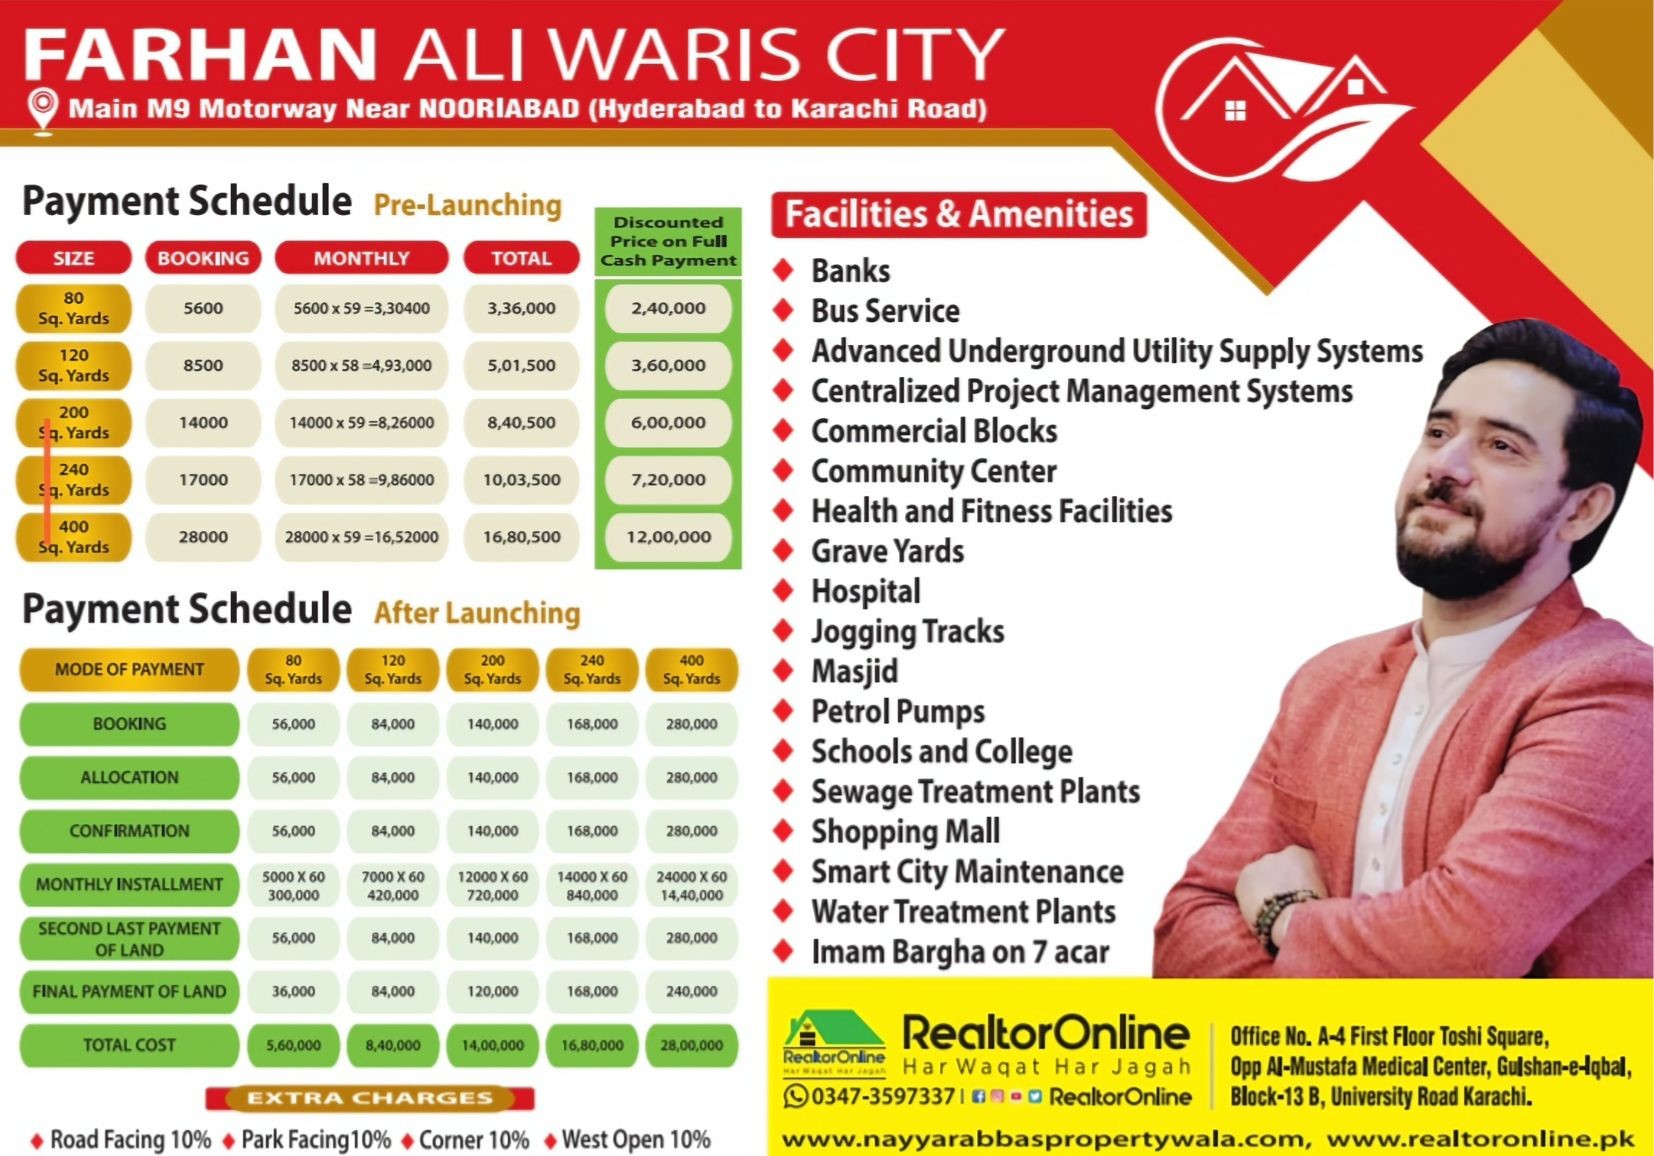 Farhan Ali waris City complete Payment plan and payment schedule